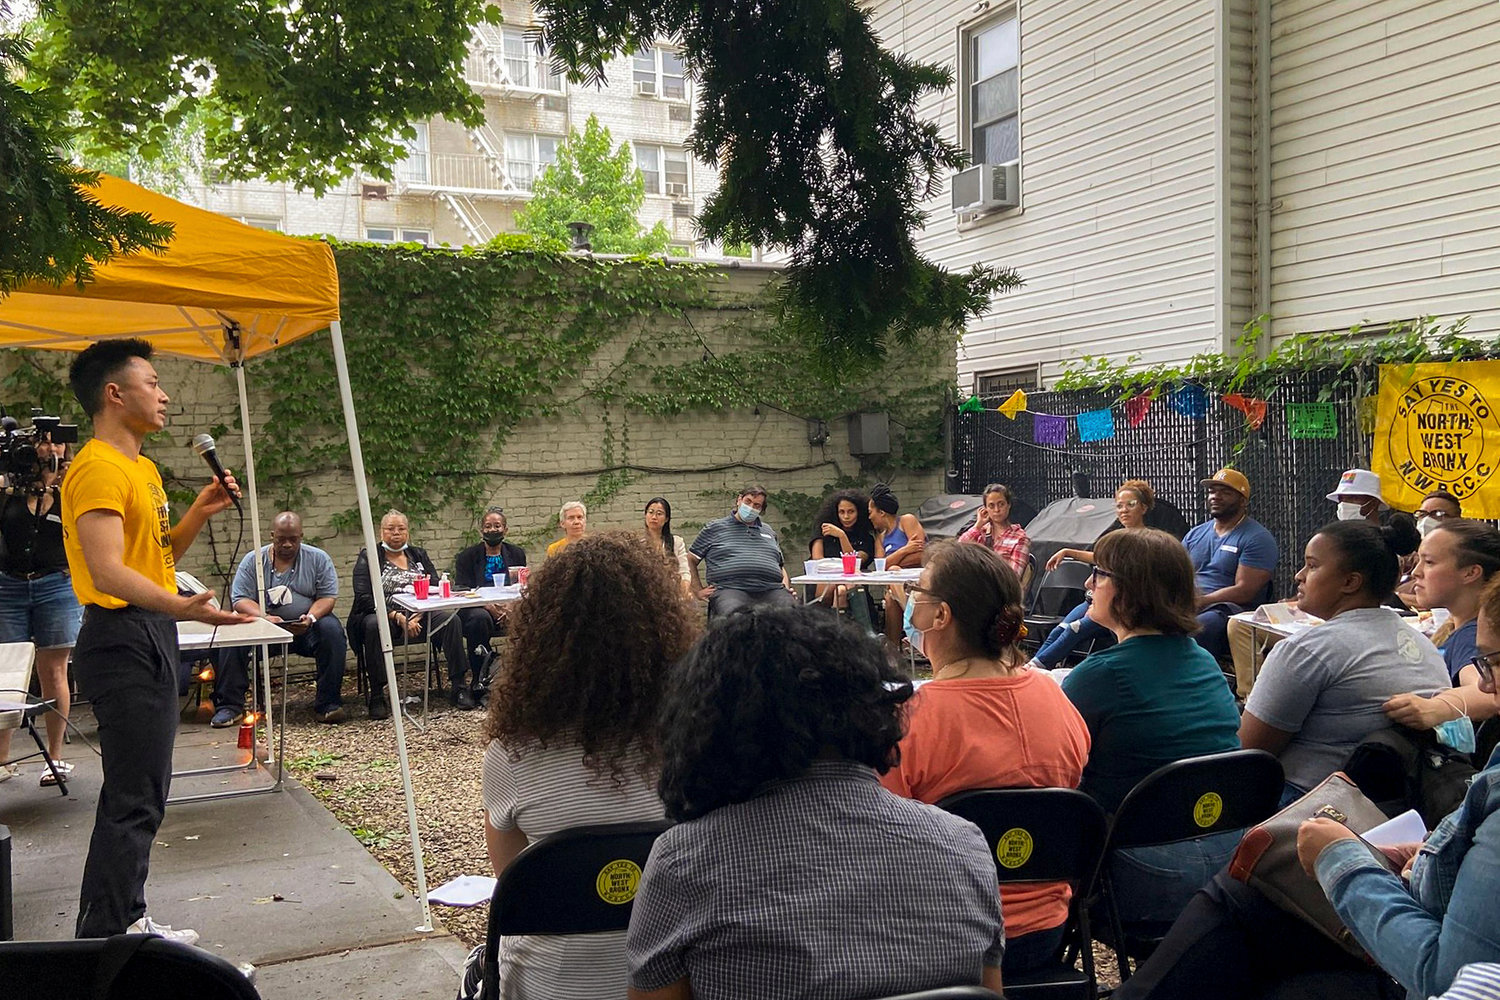 Northwest Bronx Community & Clergy Coalition staff held a workshop on community land trusts in their backyard at 103 East 196th St. June 27, one of a series of free sessions the group is holding following the launch of the Bronx Community Land Trust in 2020.